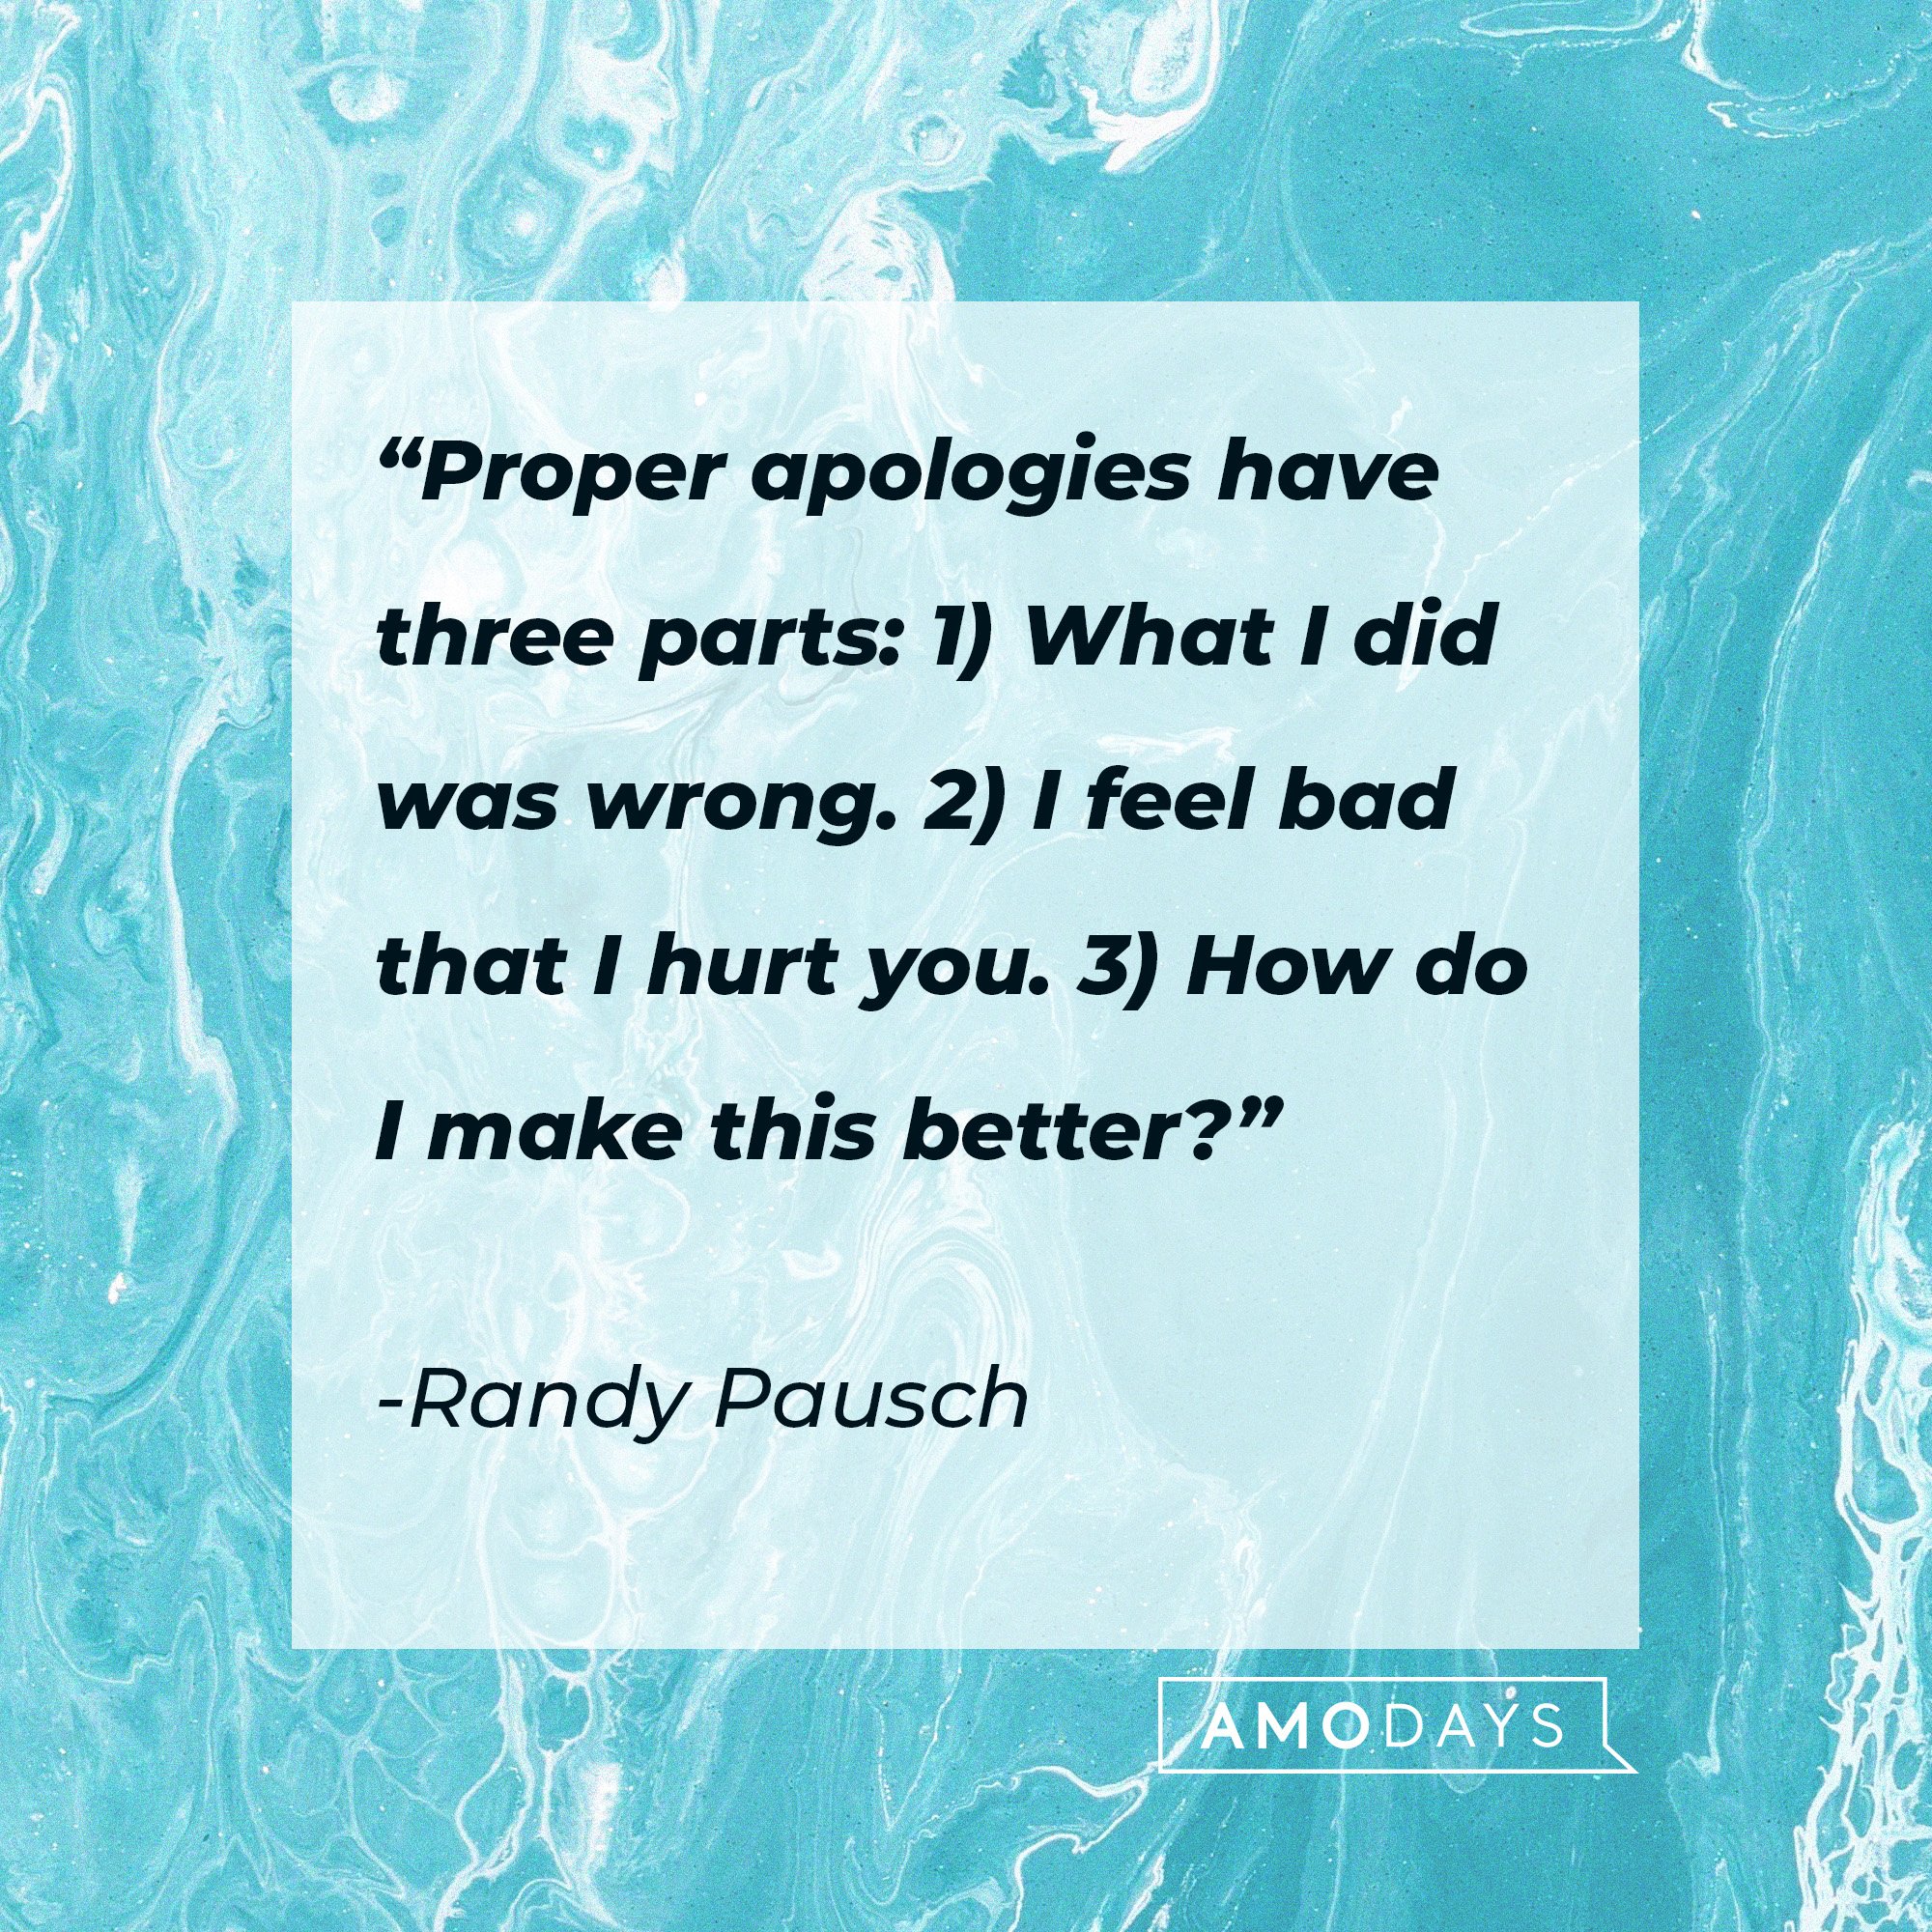 “Proper apologies have three parts: 1) What I did was wrong. 2) I feel bad that I hurt you. 3) How do I make this better?” | Image: AmoDays